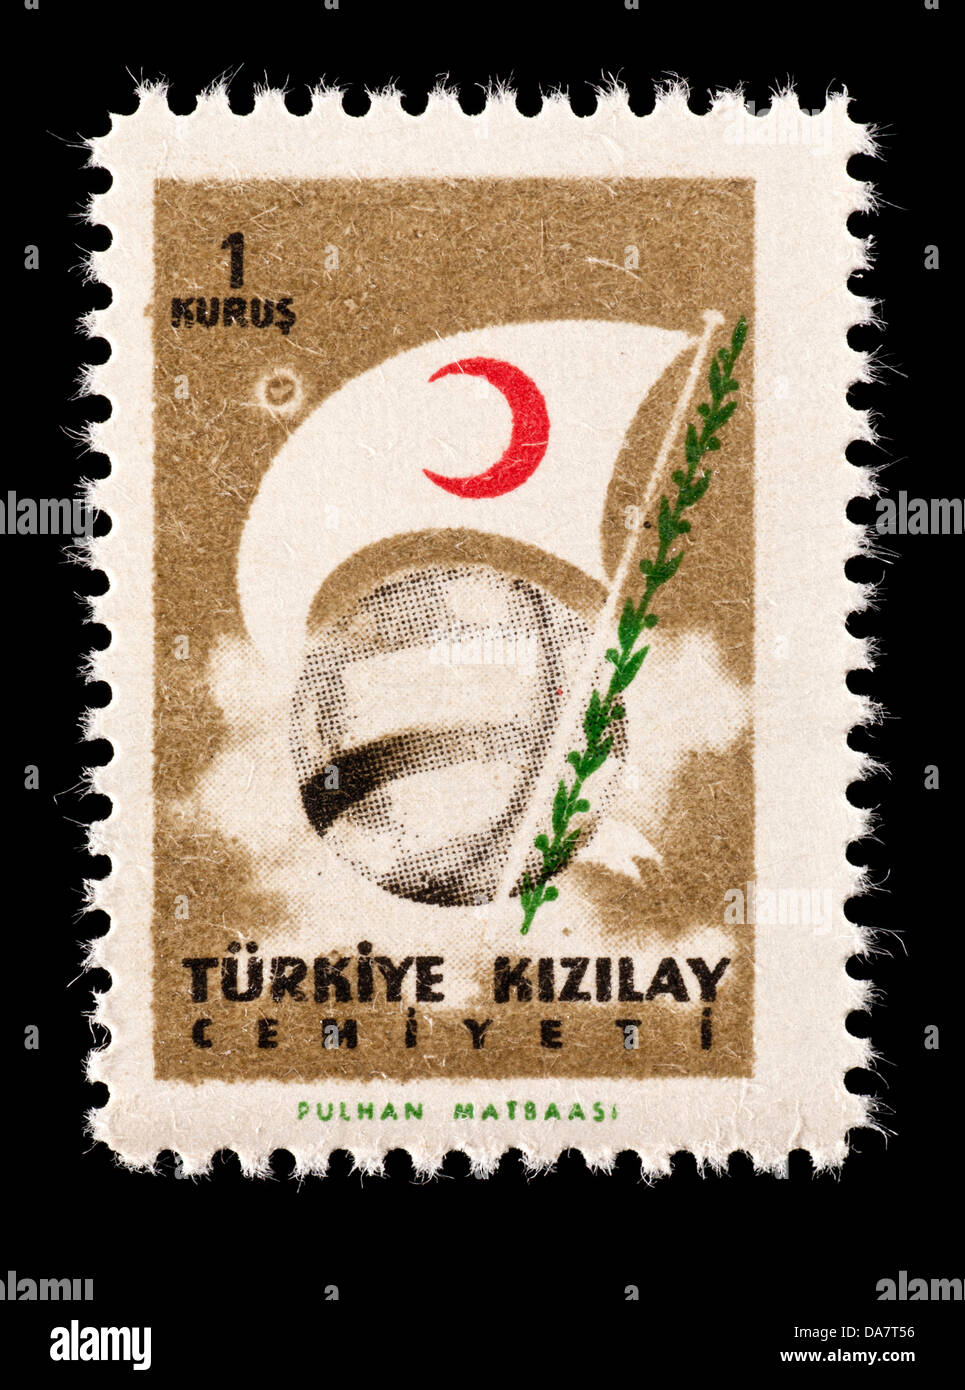 Postal tax stamp from Turkey depicting a globe and the flag of the Red Crescent. Stock Photo